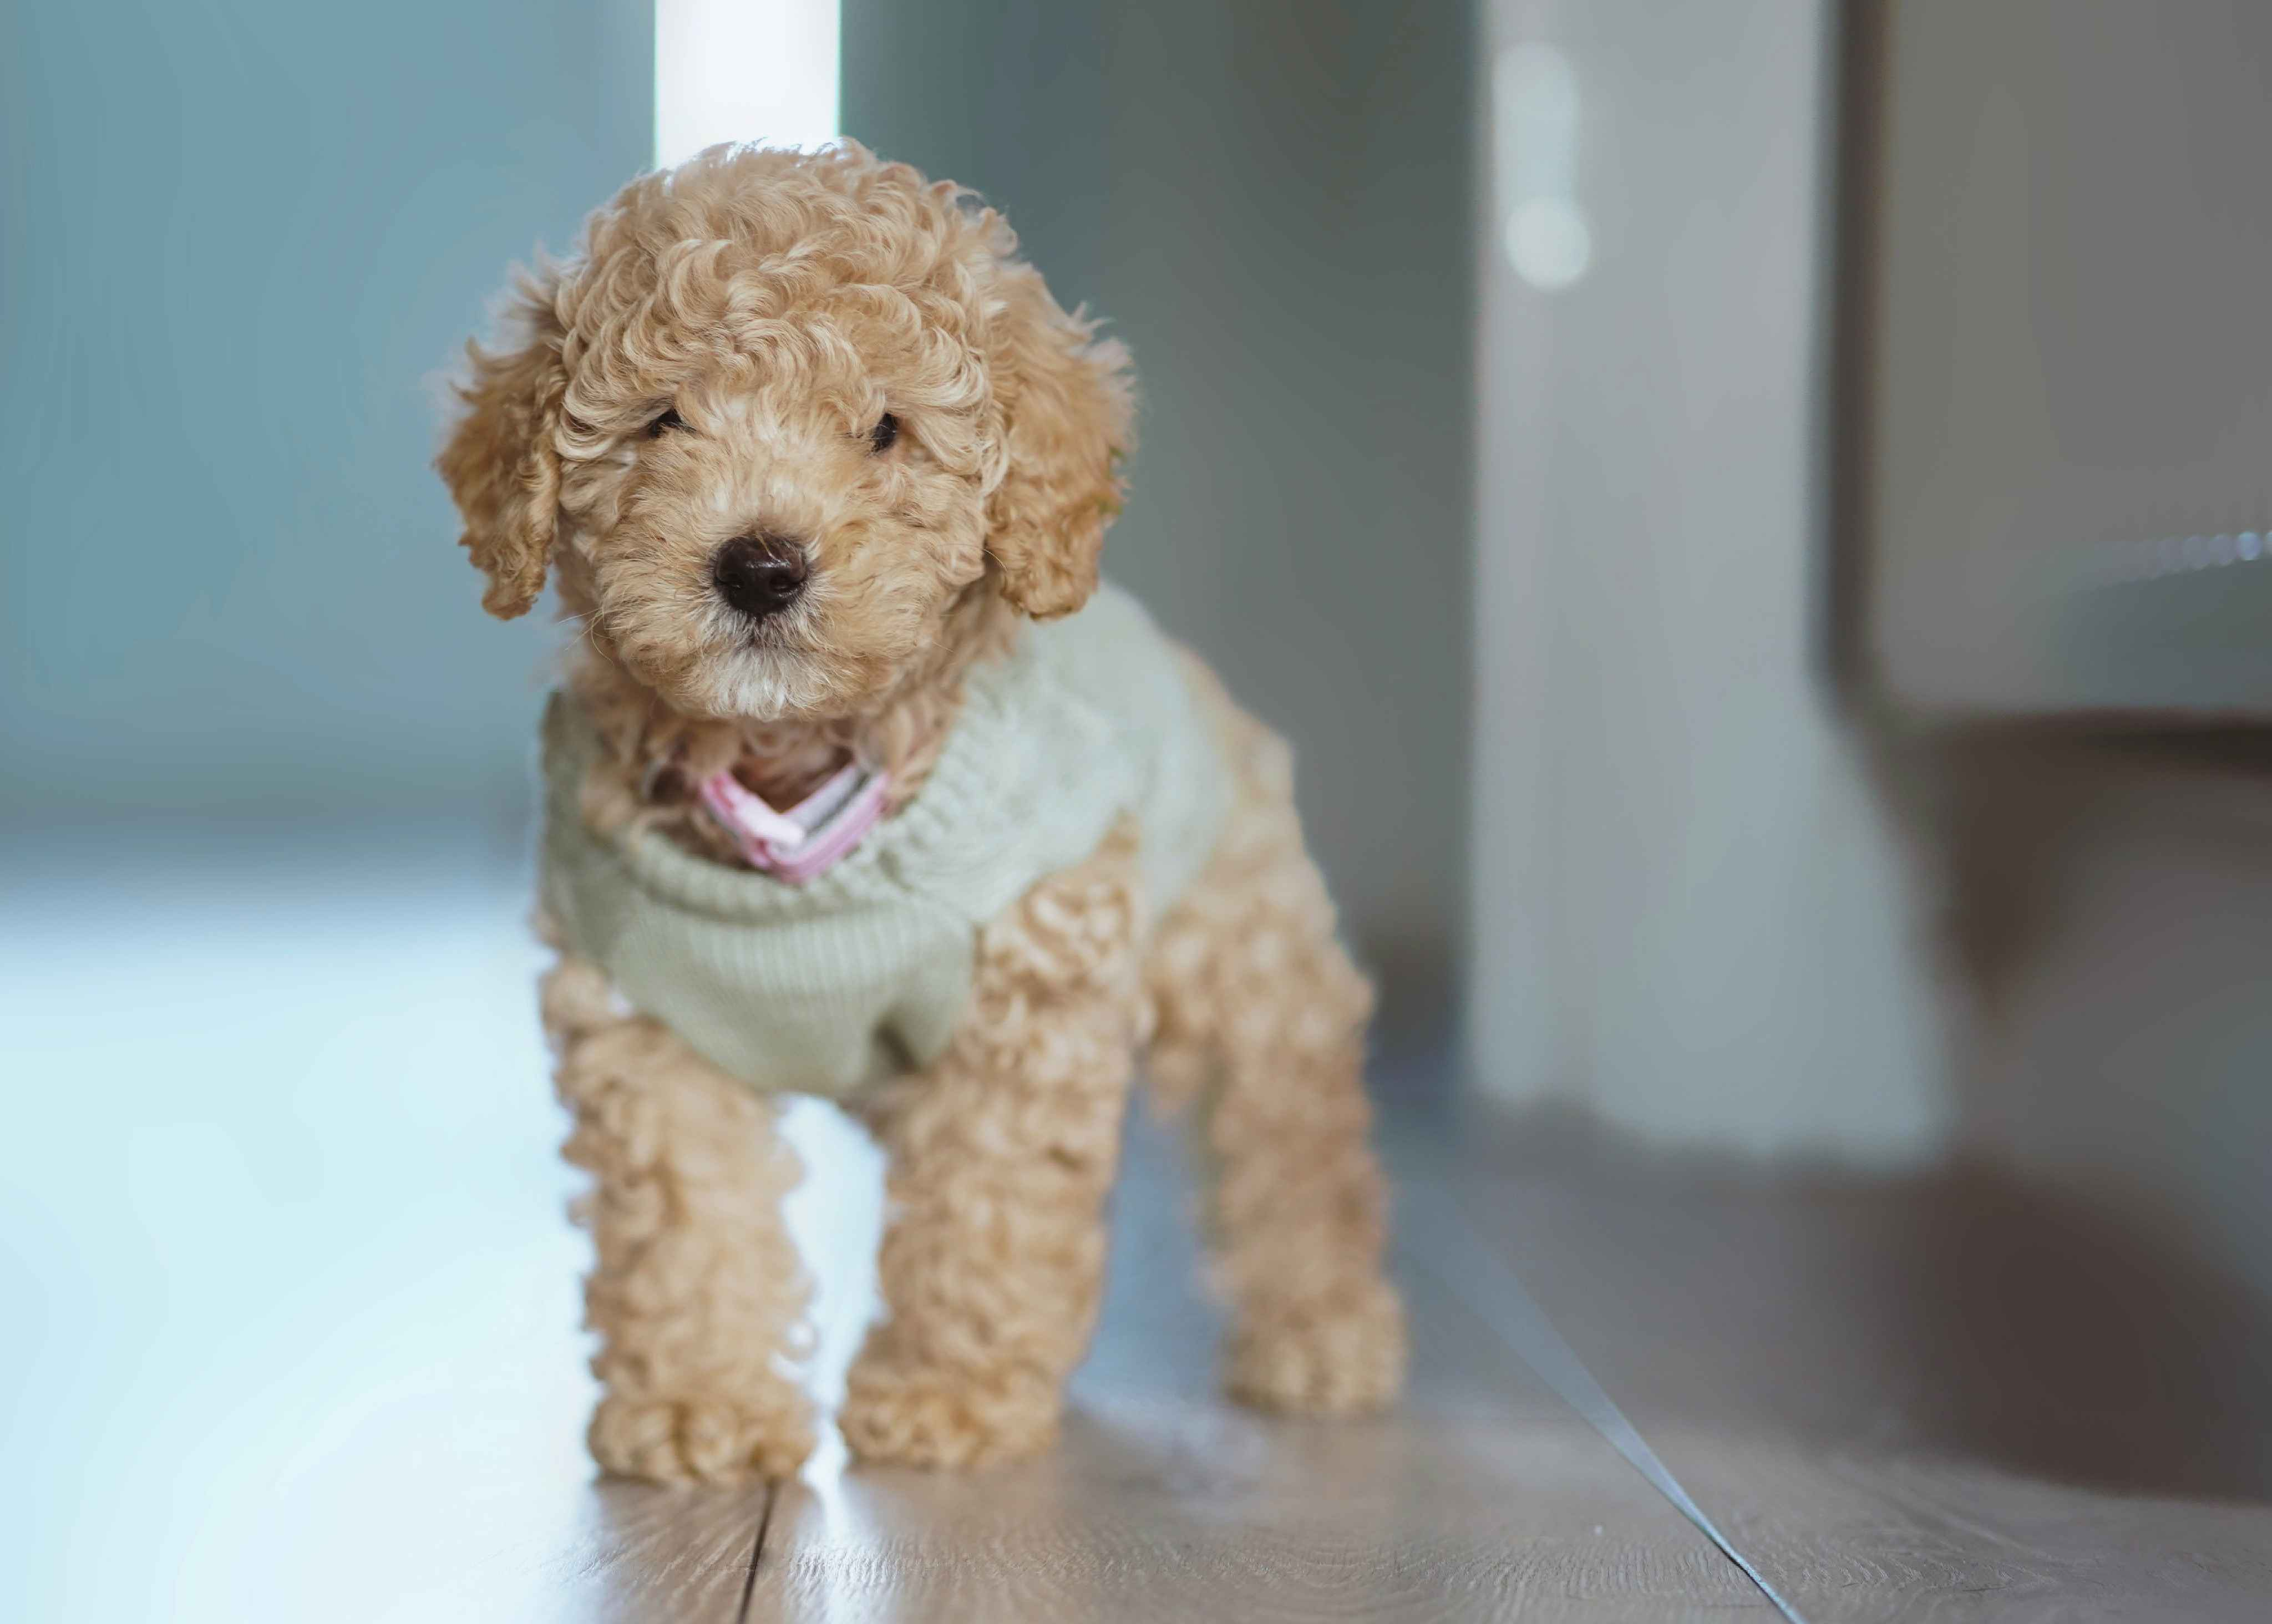 How can you ensure that your Poodle puppy is getting enough mental stimulation during the first two weeks?